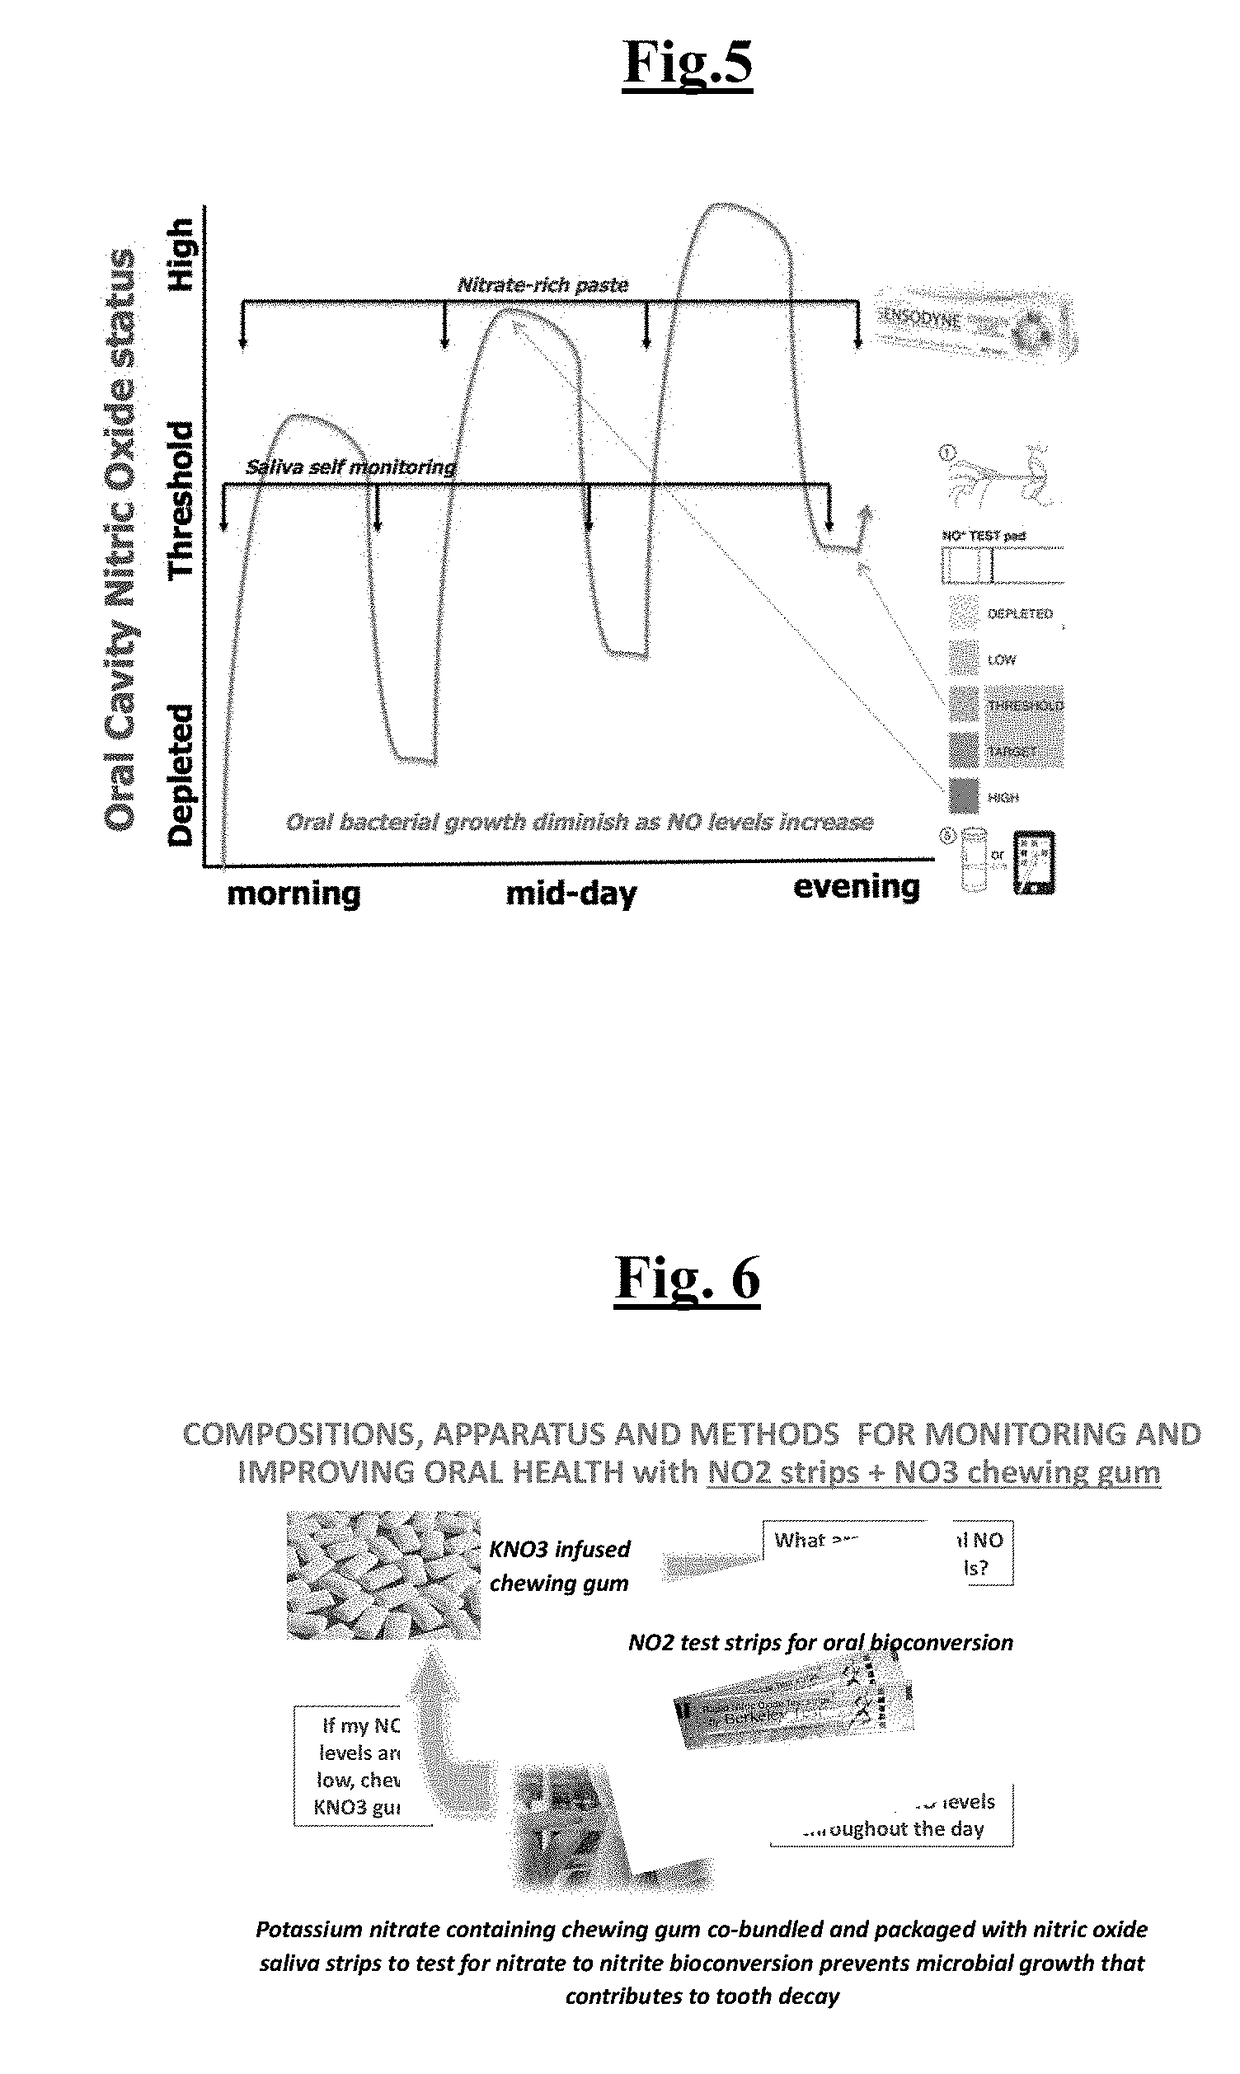 Compositions, apparatus and methods for monitoring and improving oral health